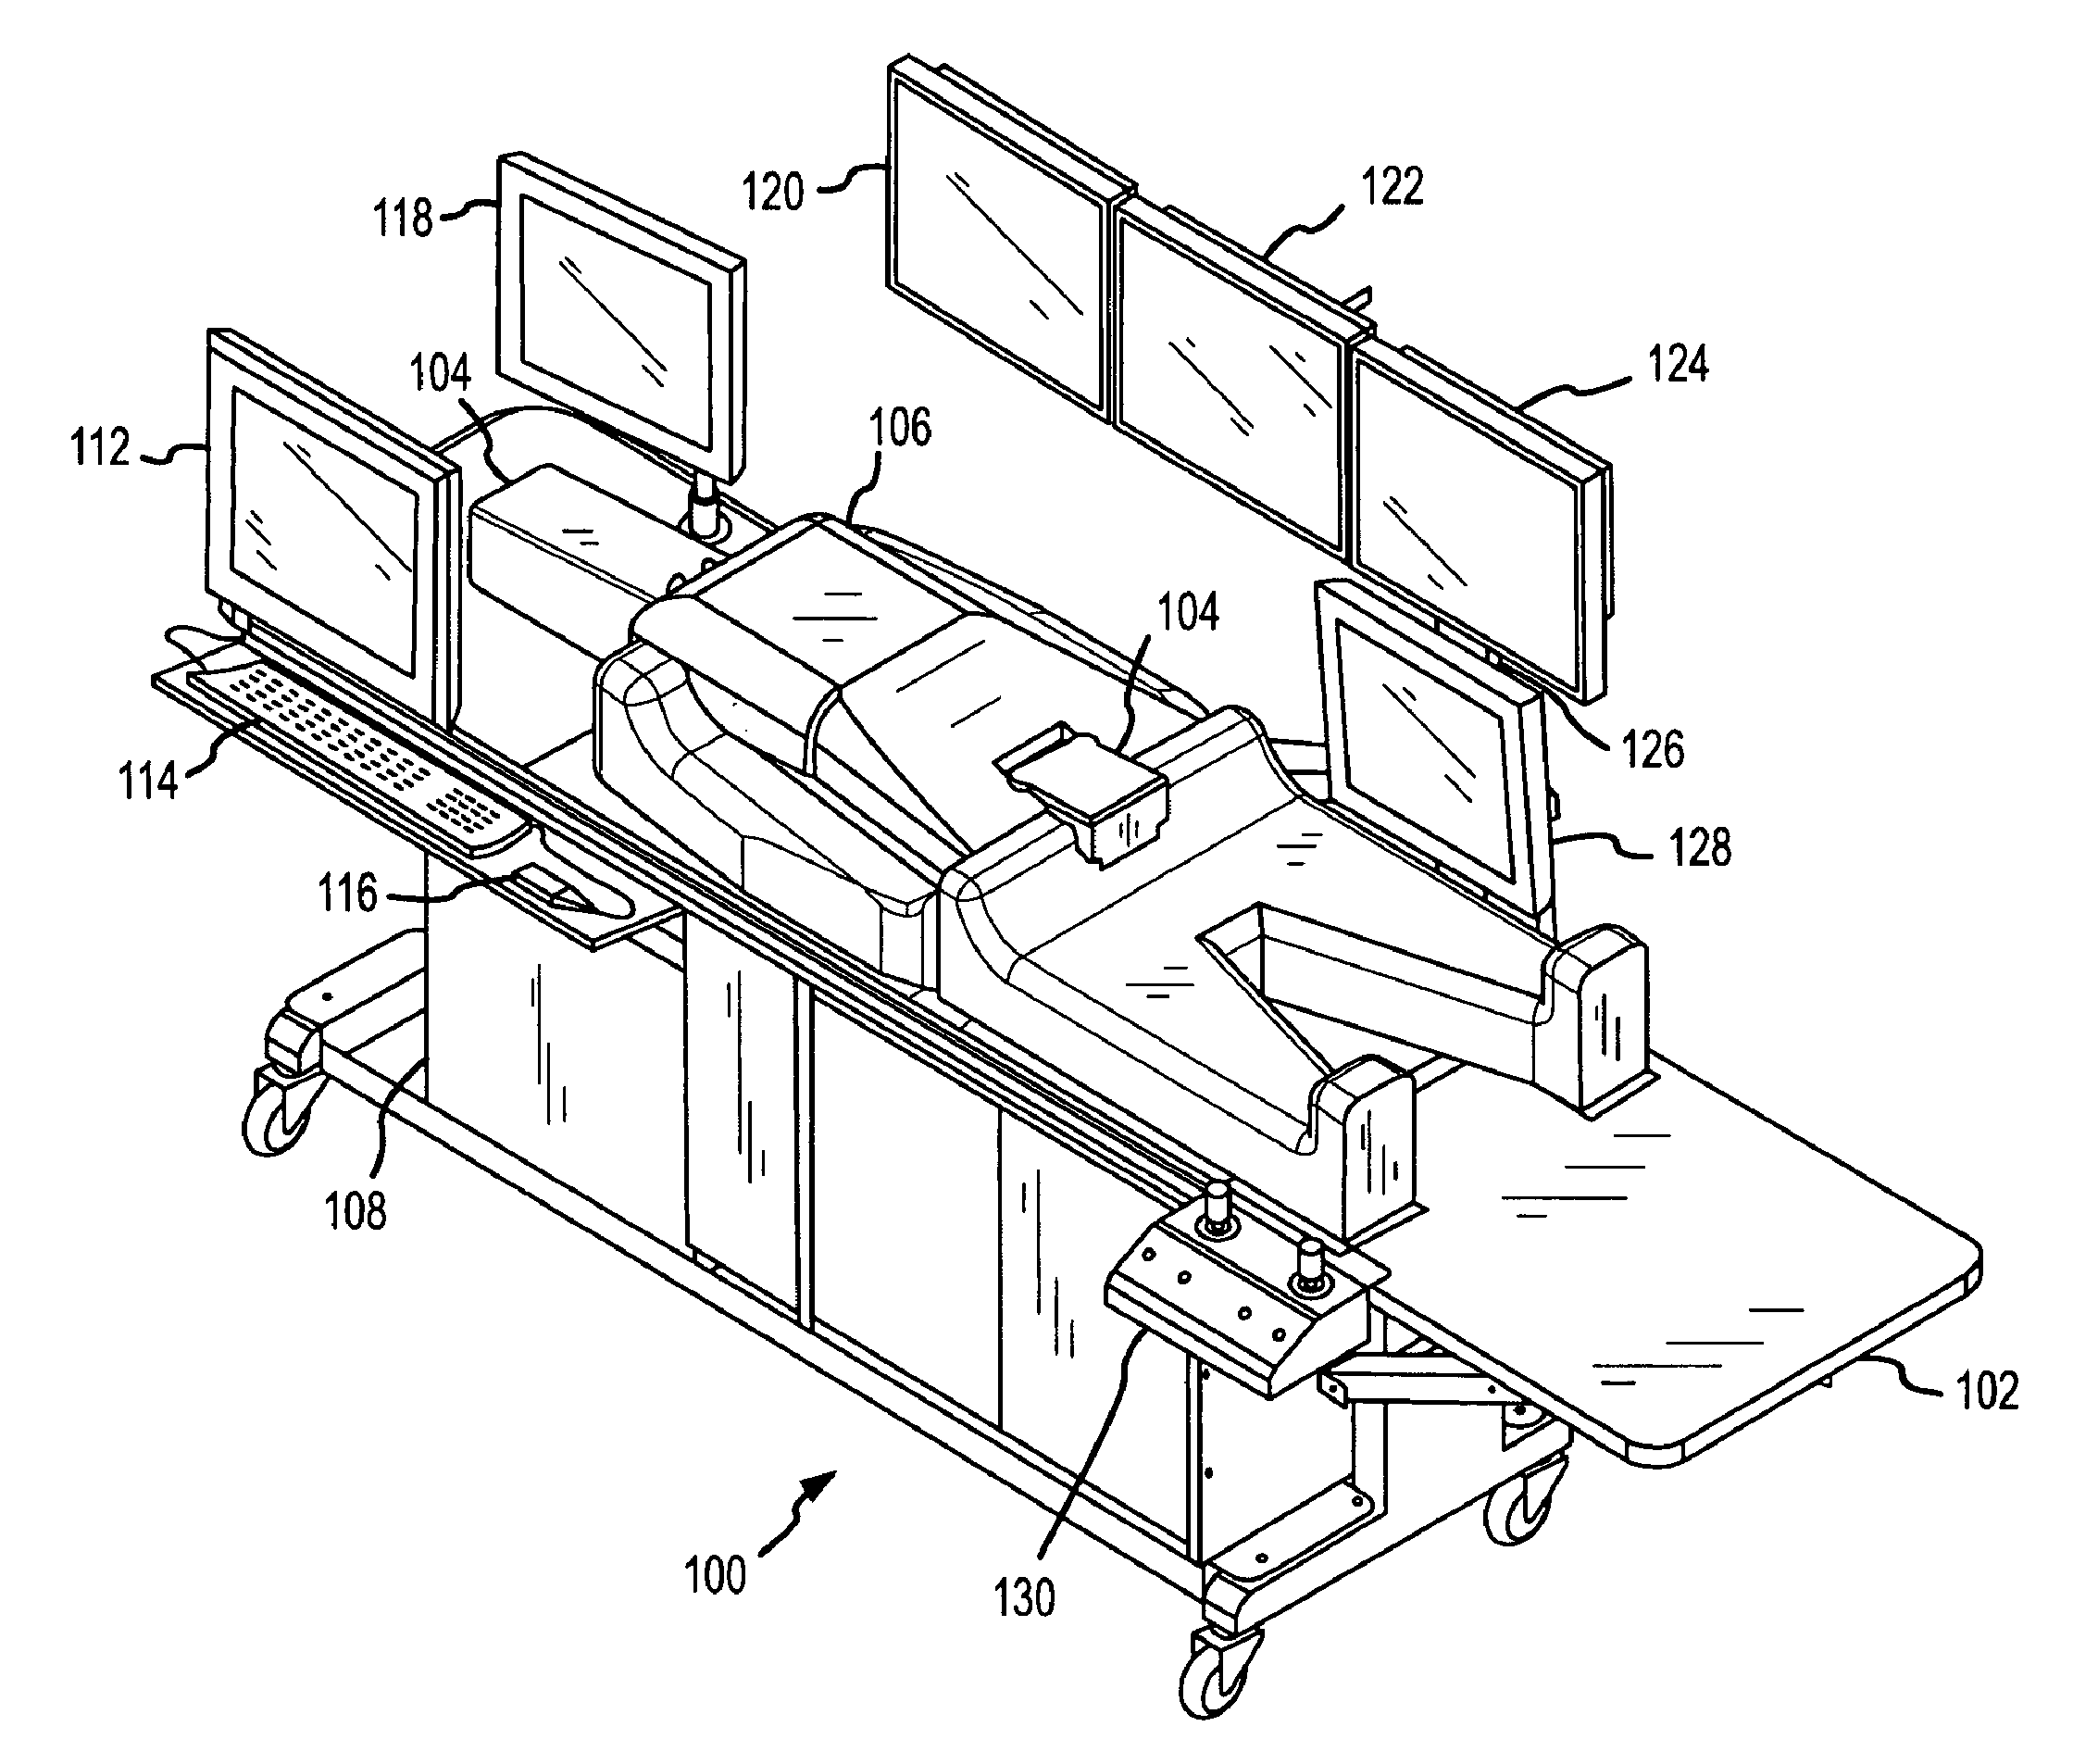 Medical Simulation System and Method